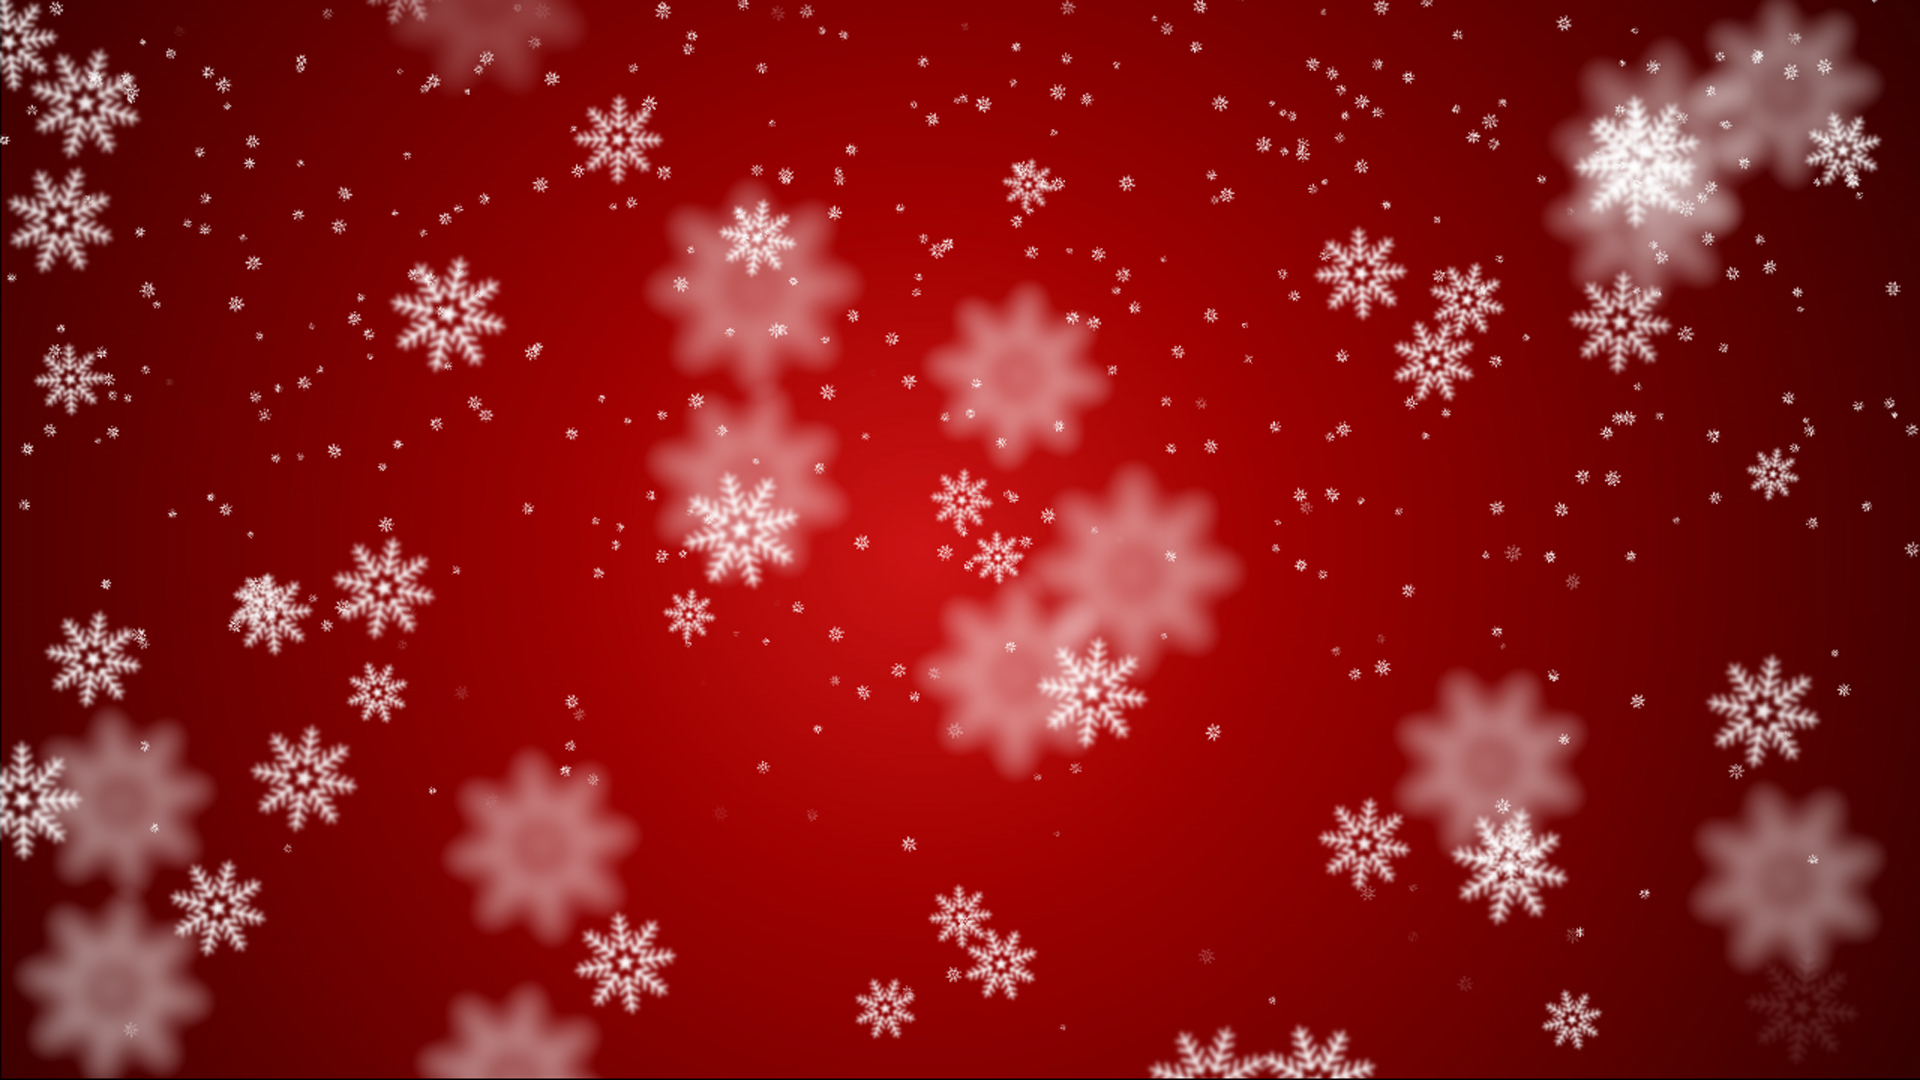 Red Christmas Pattern Wallpaper Image Amp Pictures Becuo